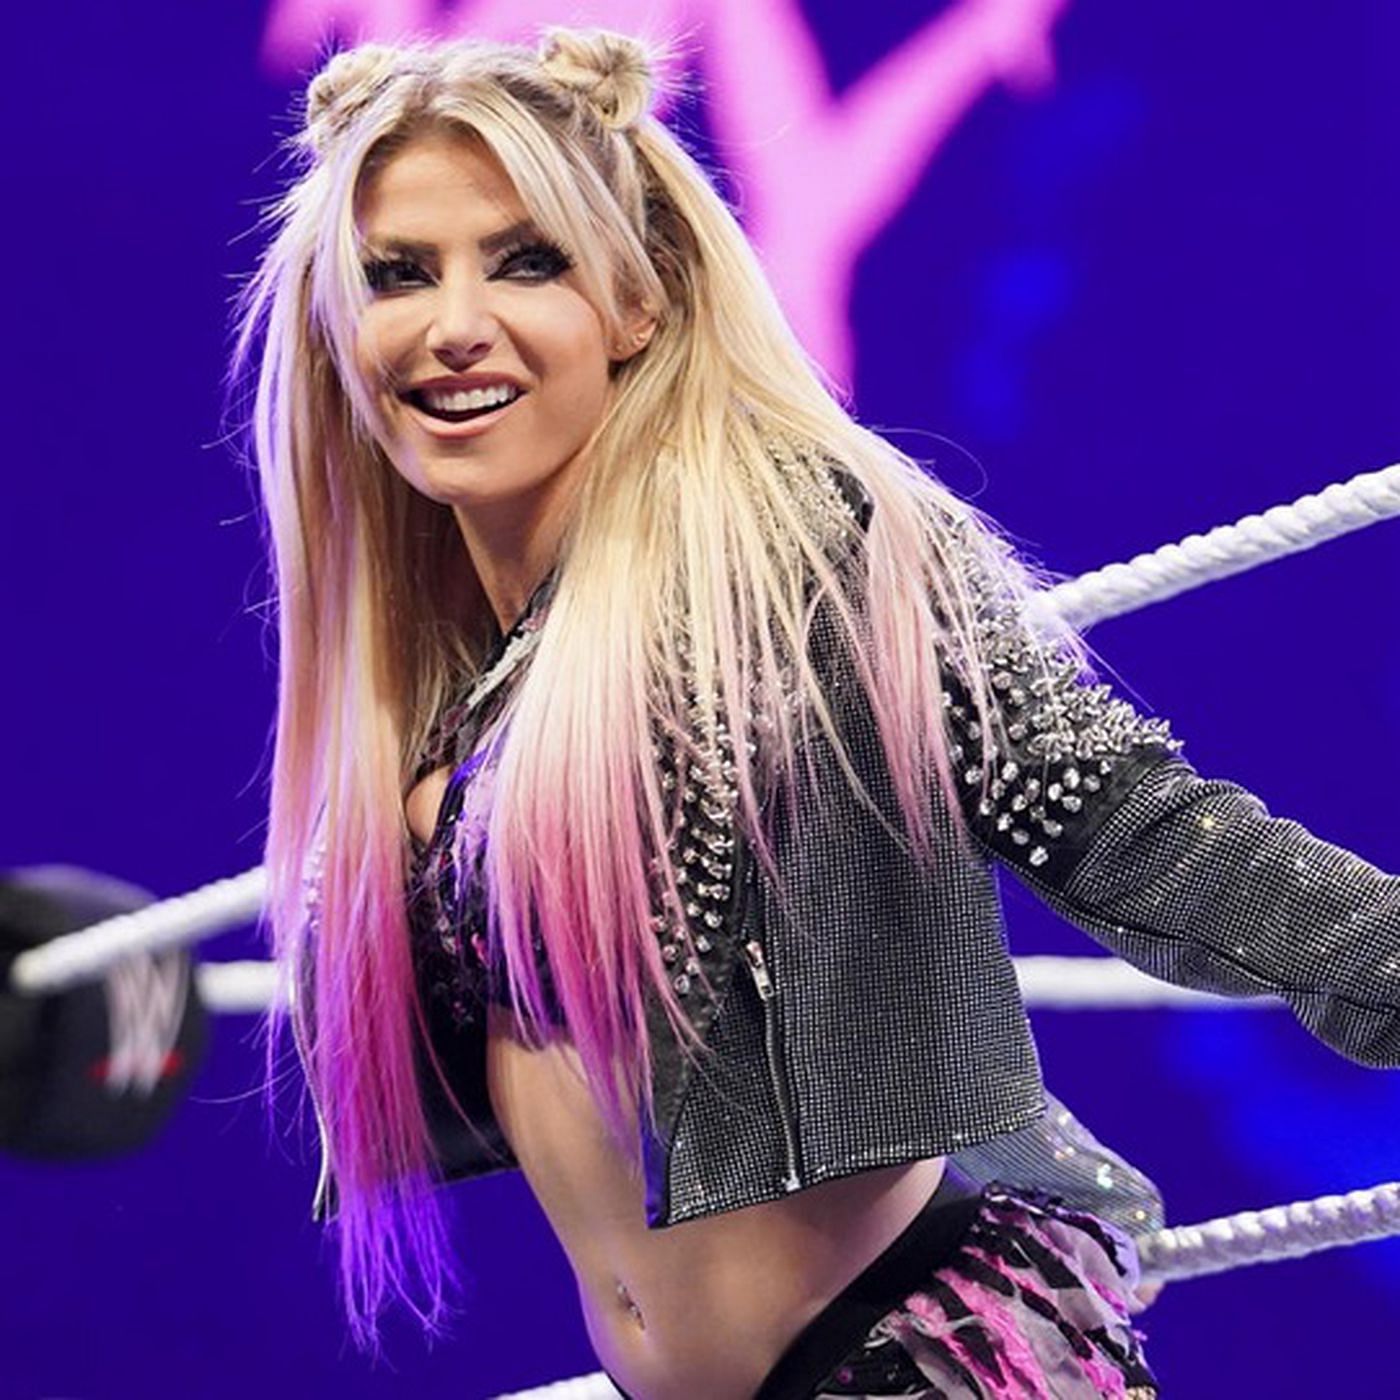 Alexa Bliss is a former multi-time Champion in WWE.